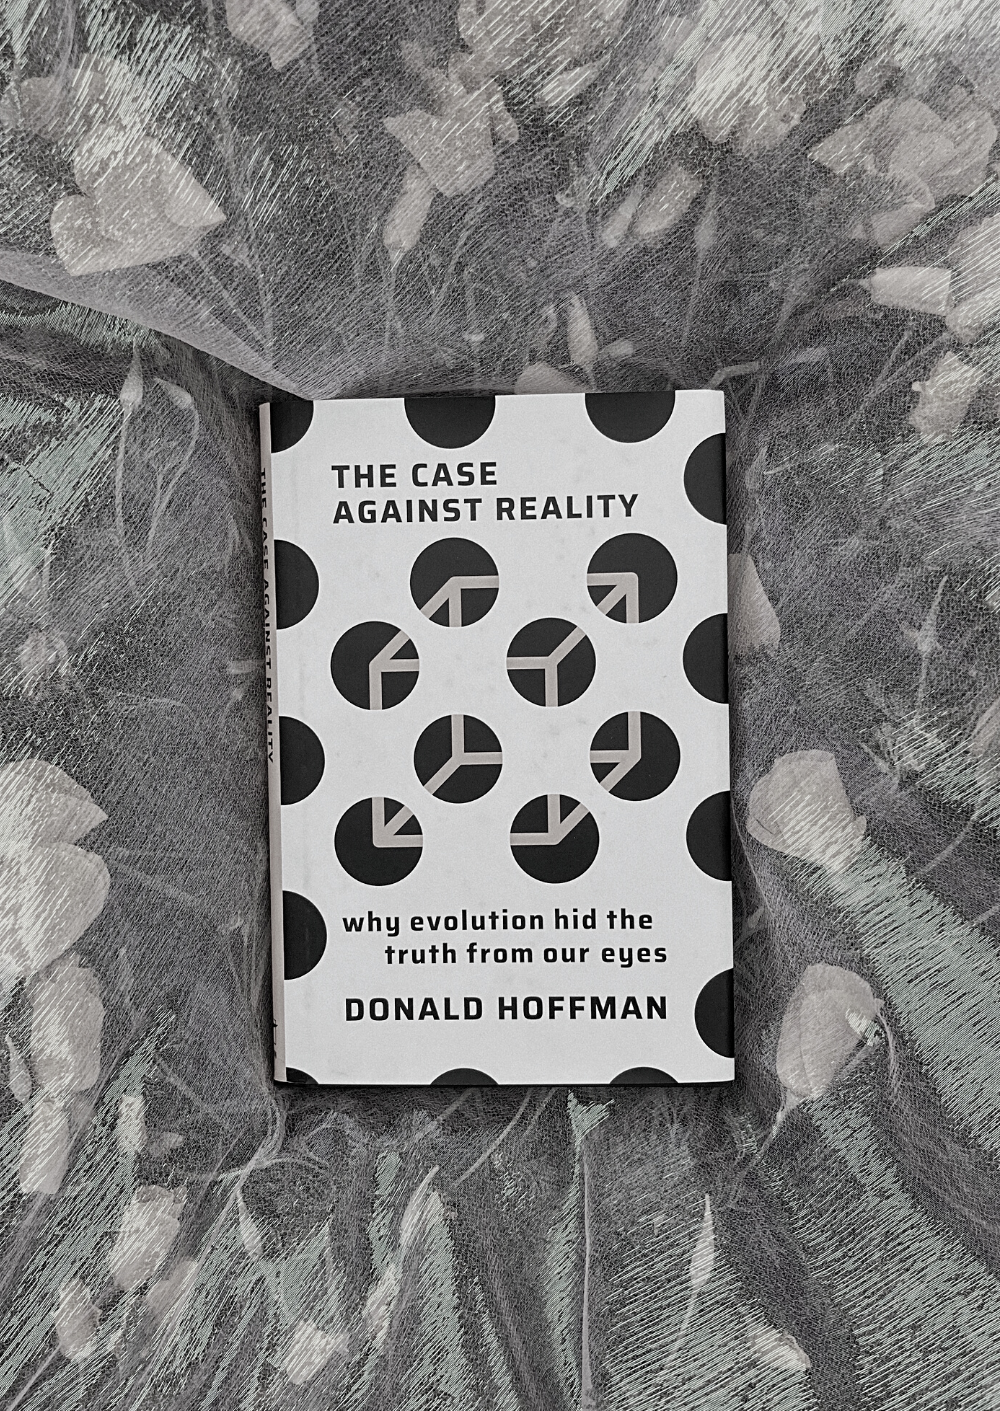 Donald Hoffman - The Case Against Reality